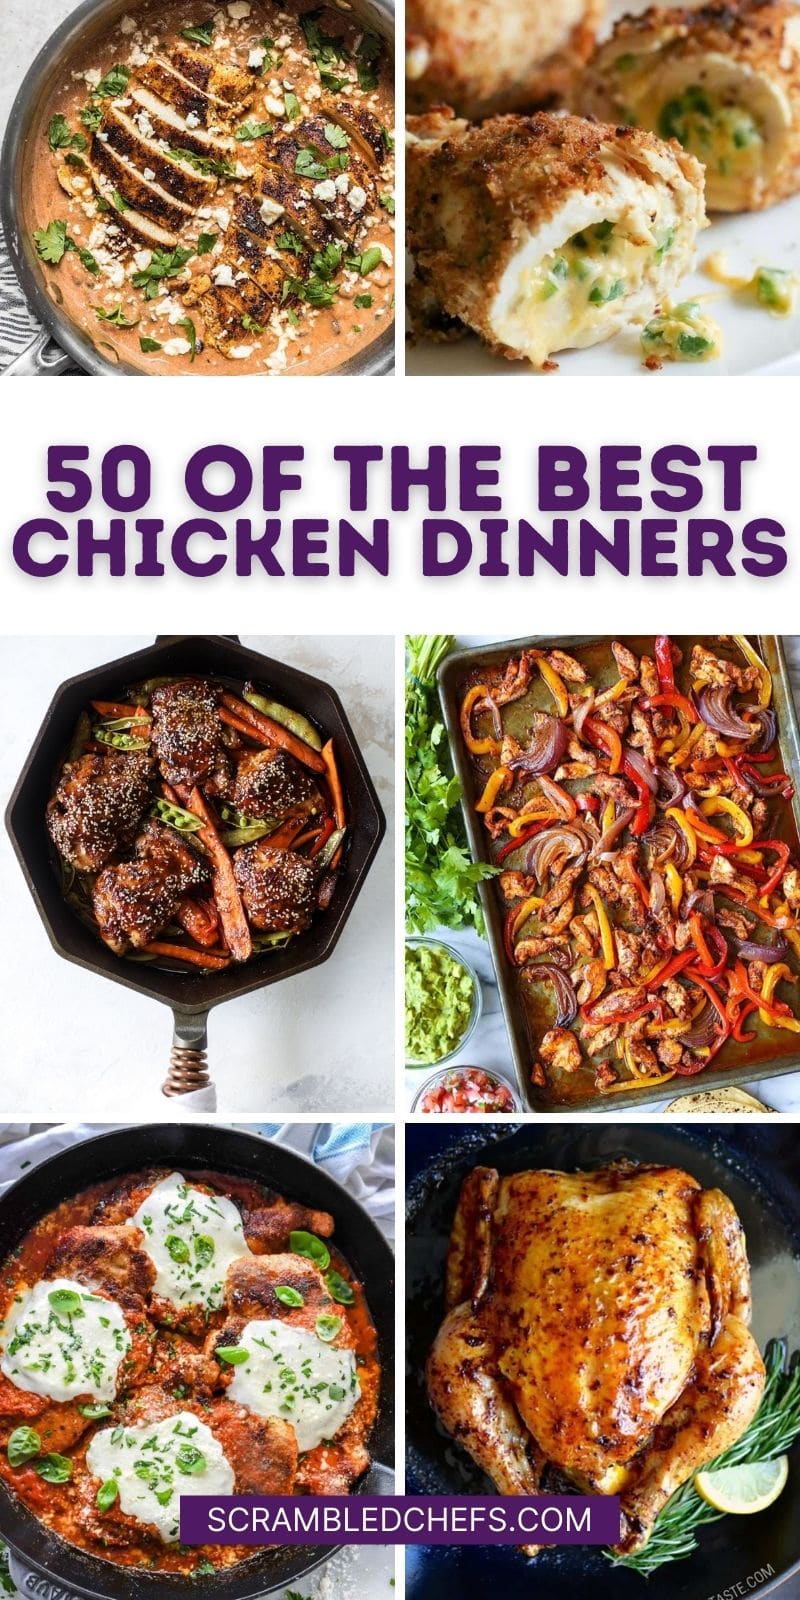 50 Chicken Dinner Recipes Perfect for Cold Weather - Scrambled Chefs